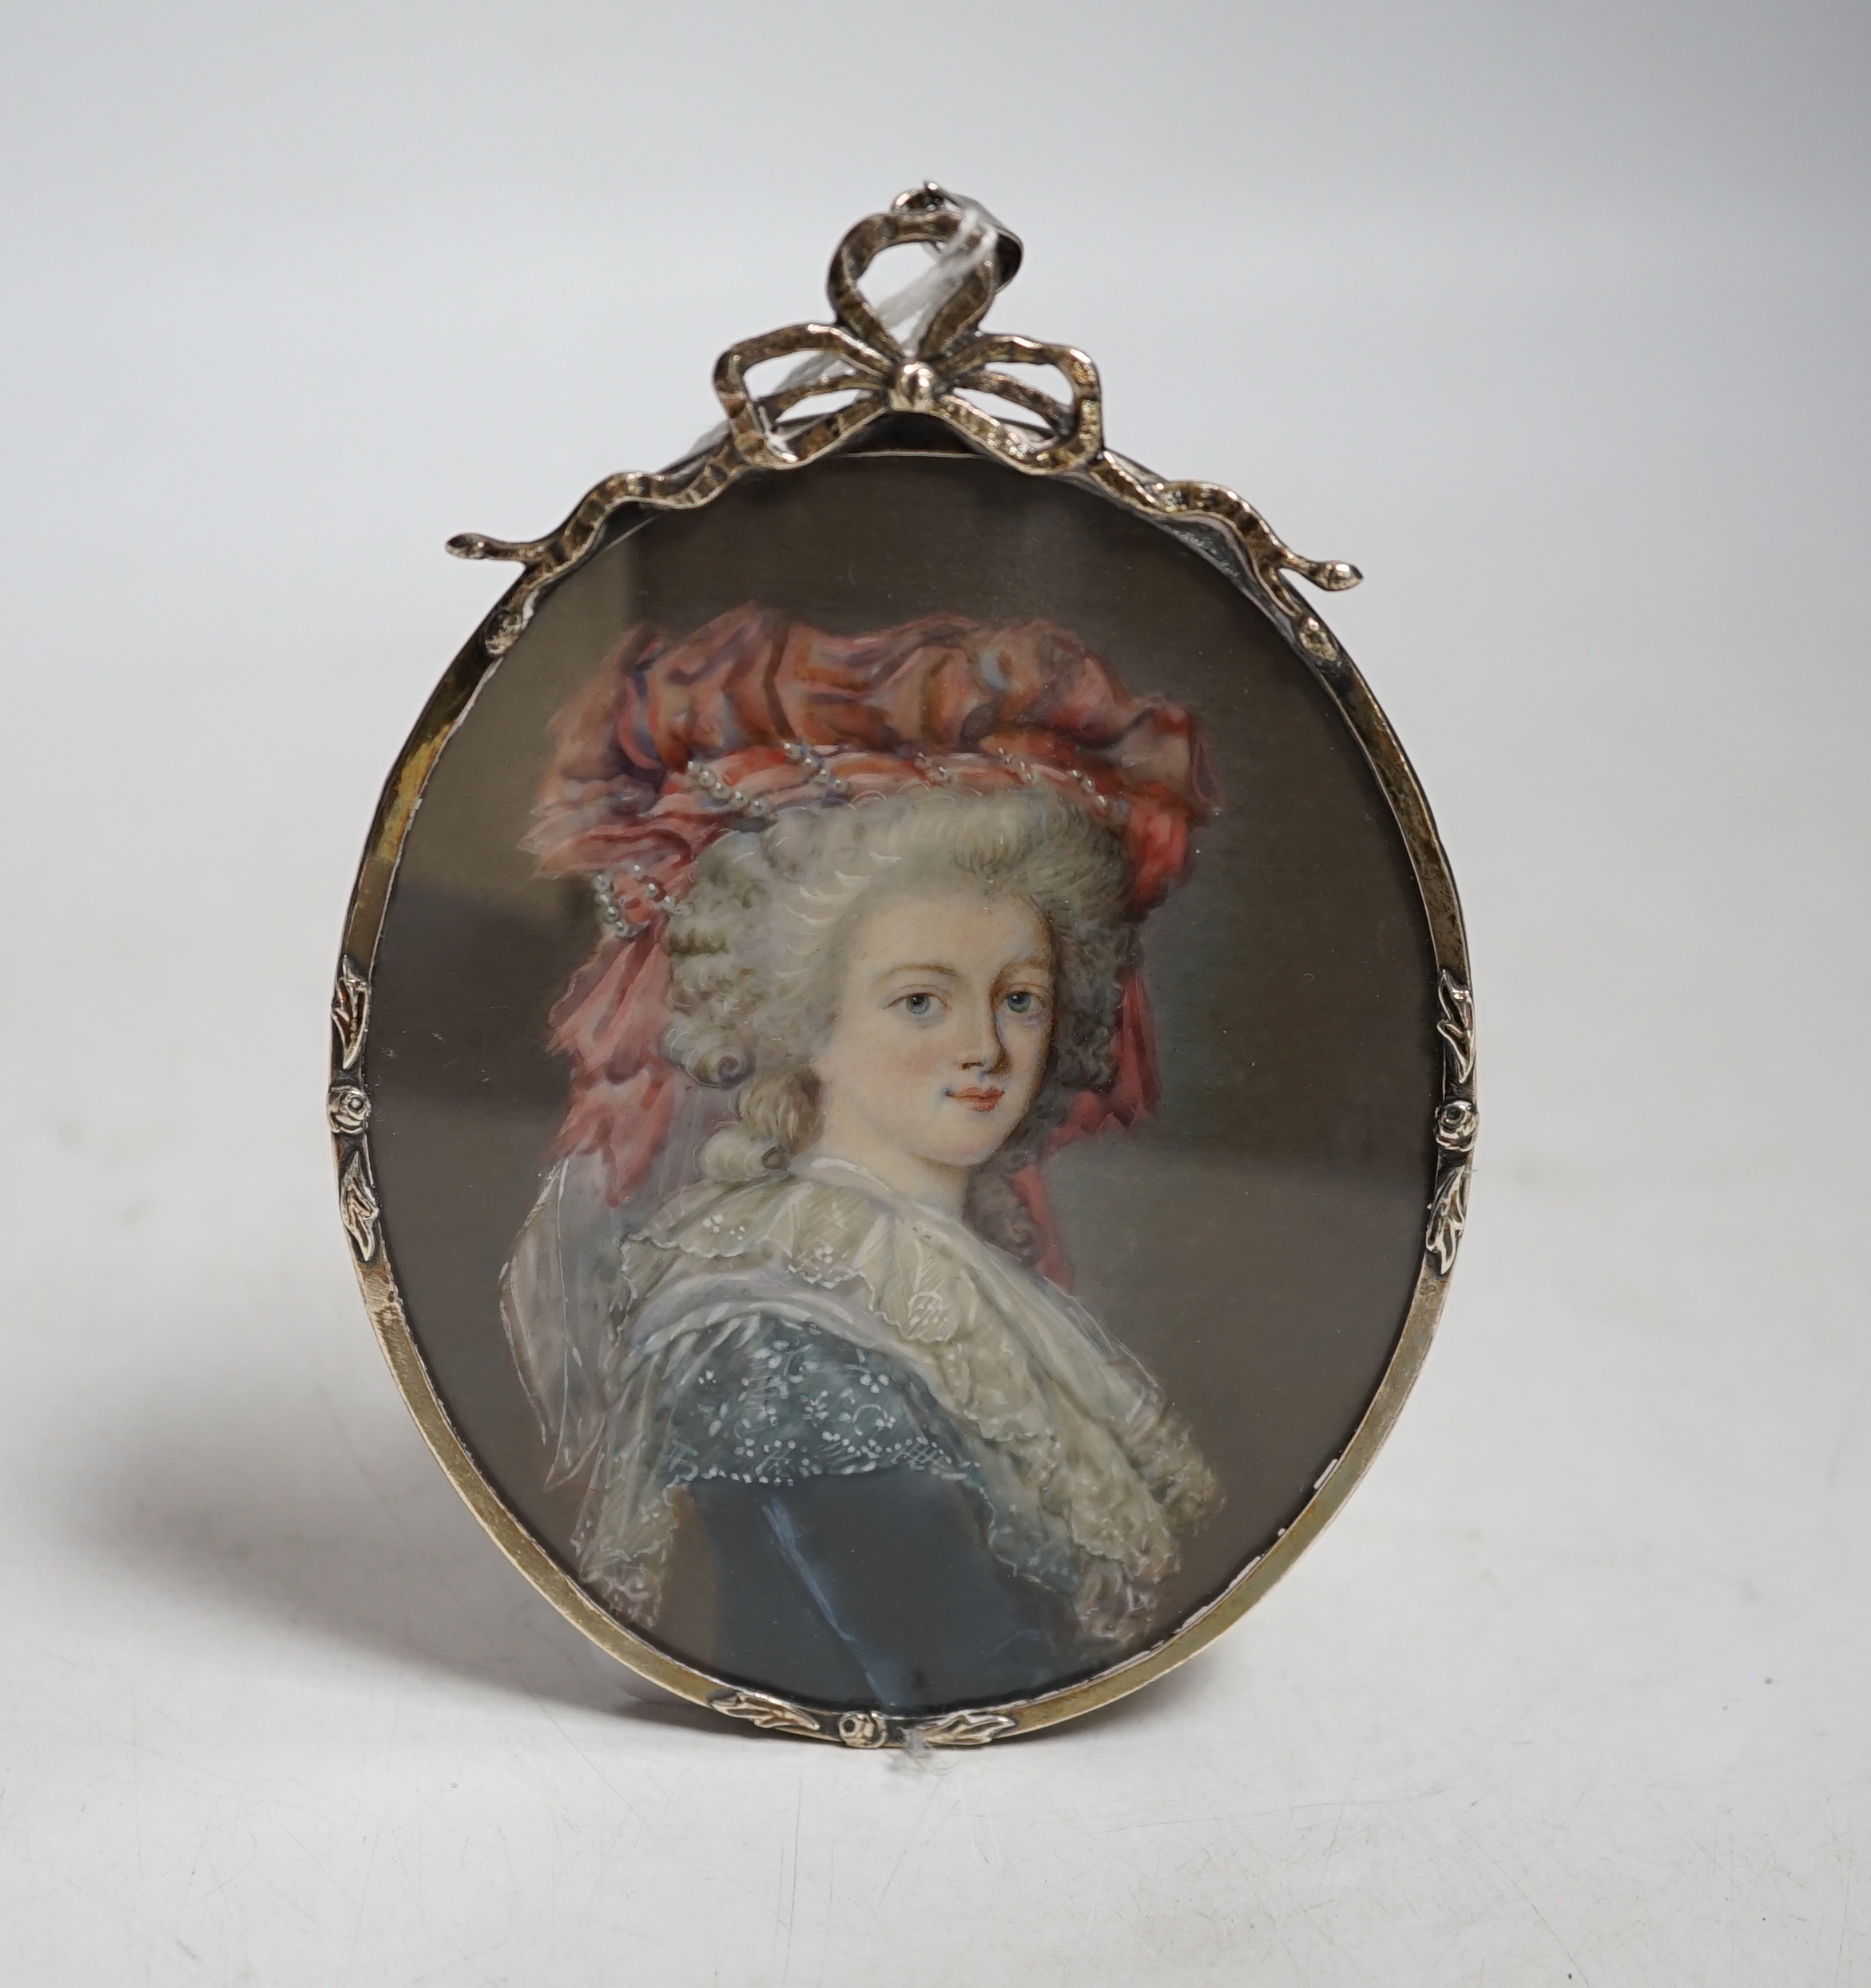 Miniature watercolour on ivory of an 18th century lady, possibly Marie Antoinette CITES Submission reference CLXFMY6A